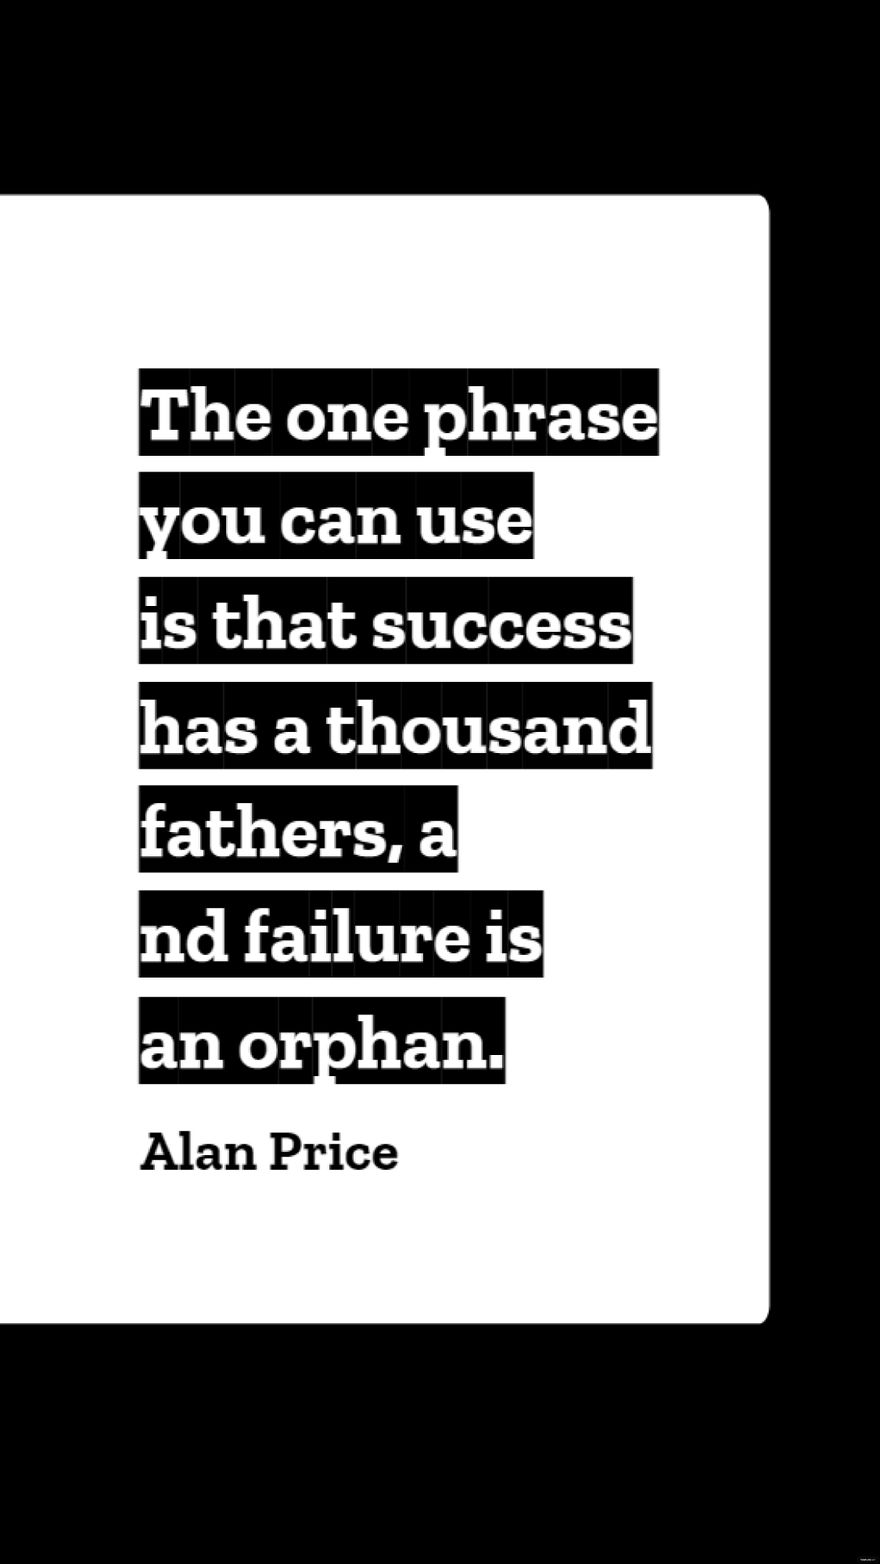 Alan Price - The one phrase you can use is that success has a thousand fathers, and failure is an orphan.